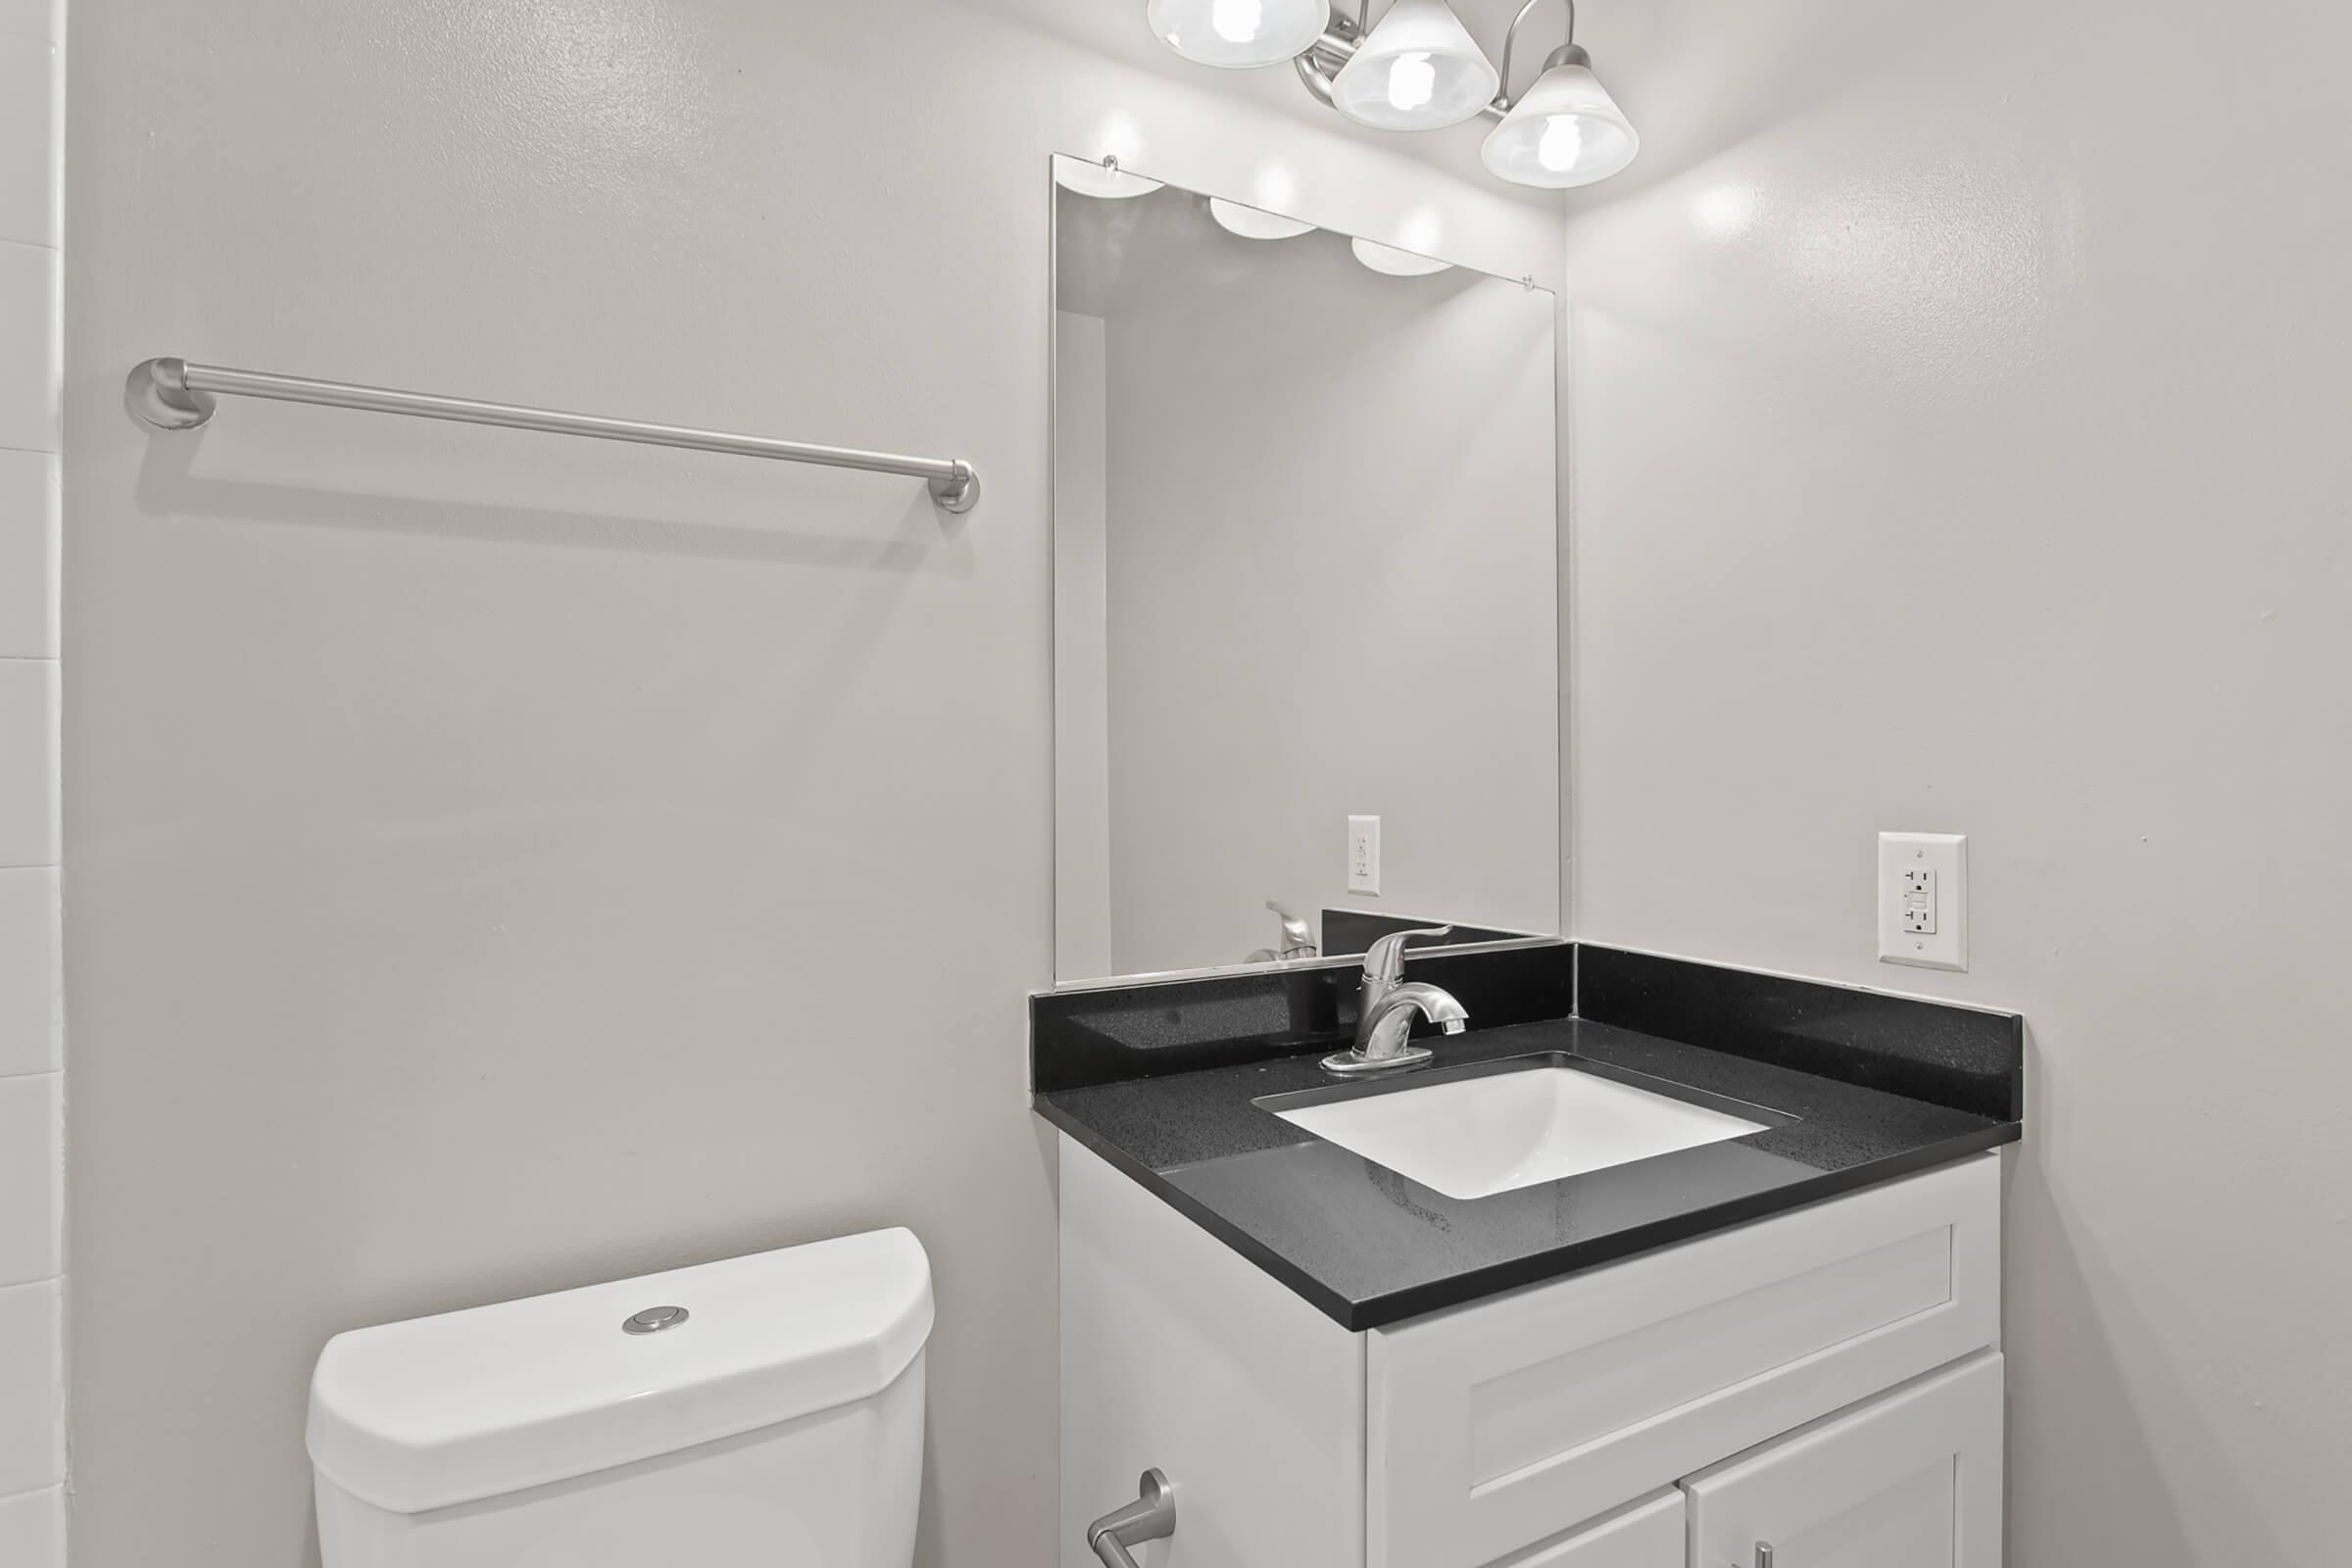 Bathroom at Huntington Square Apartments in Columbia, MD